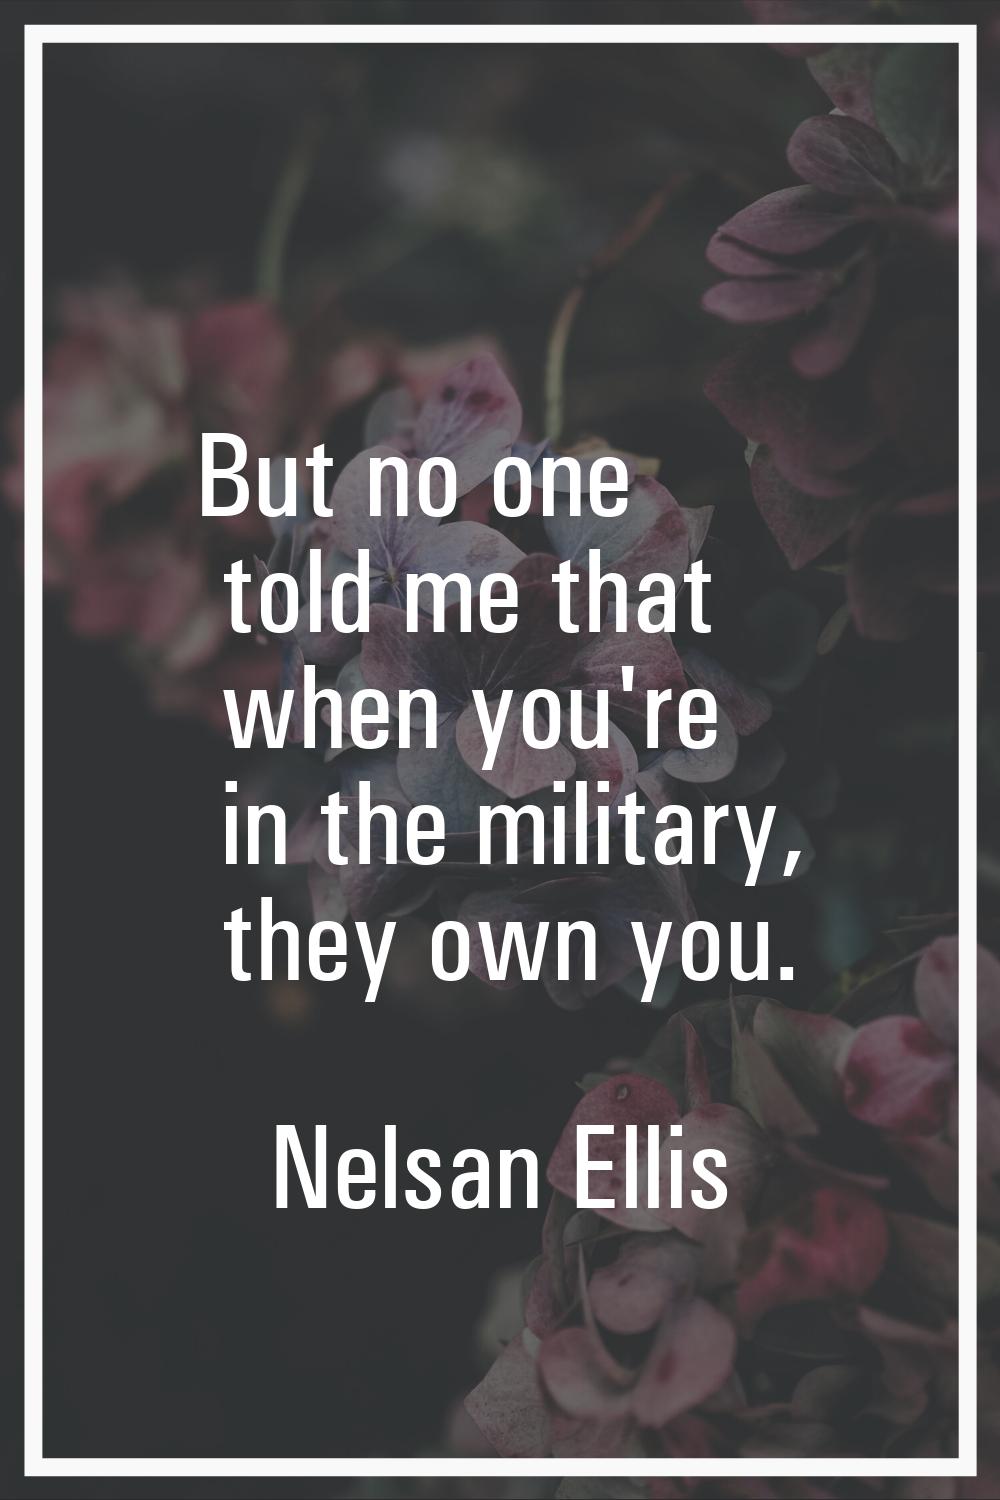 But no one told me that when you're in the military, they own you.